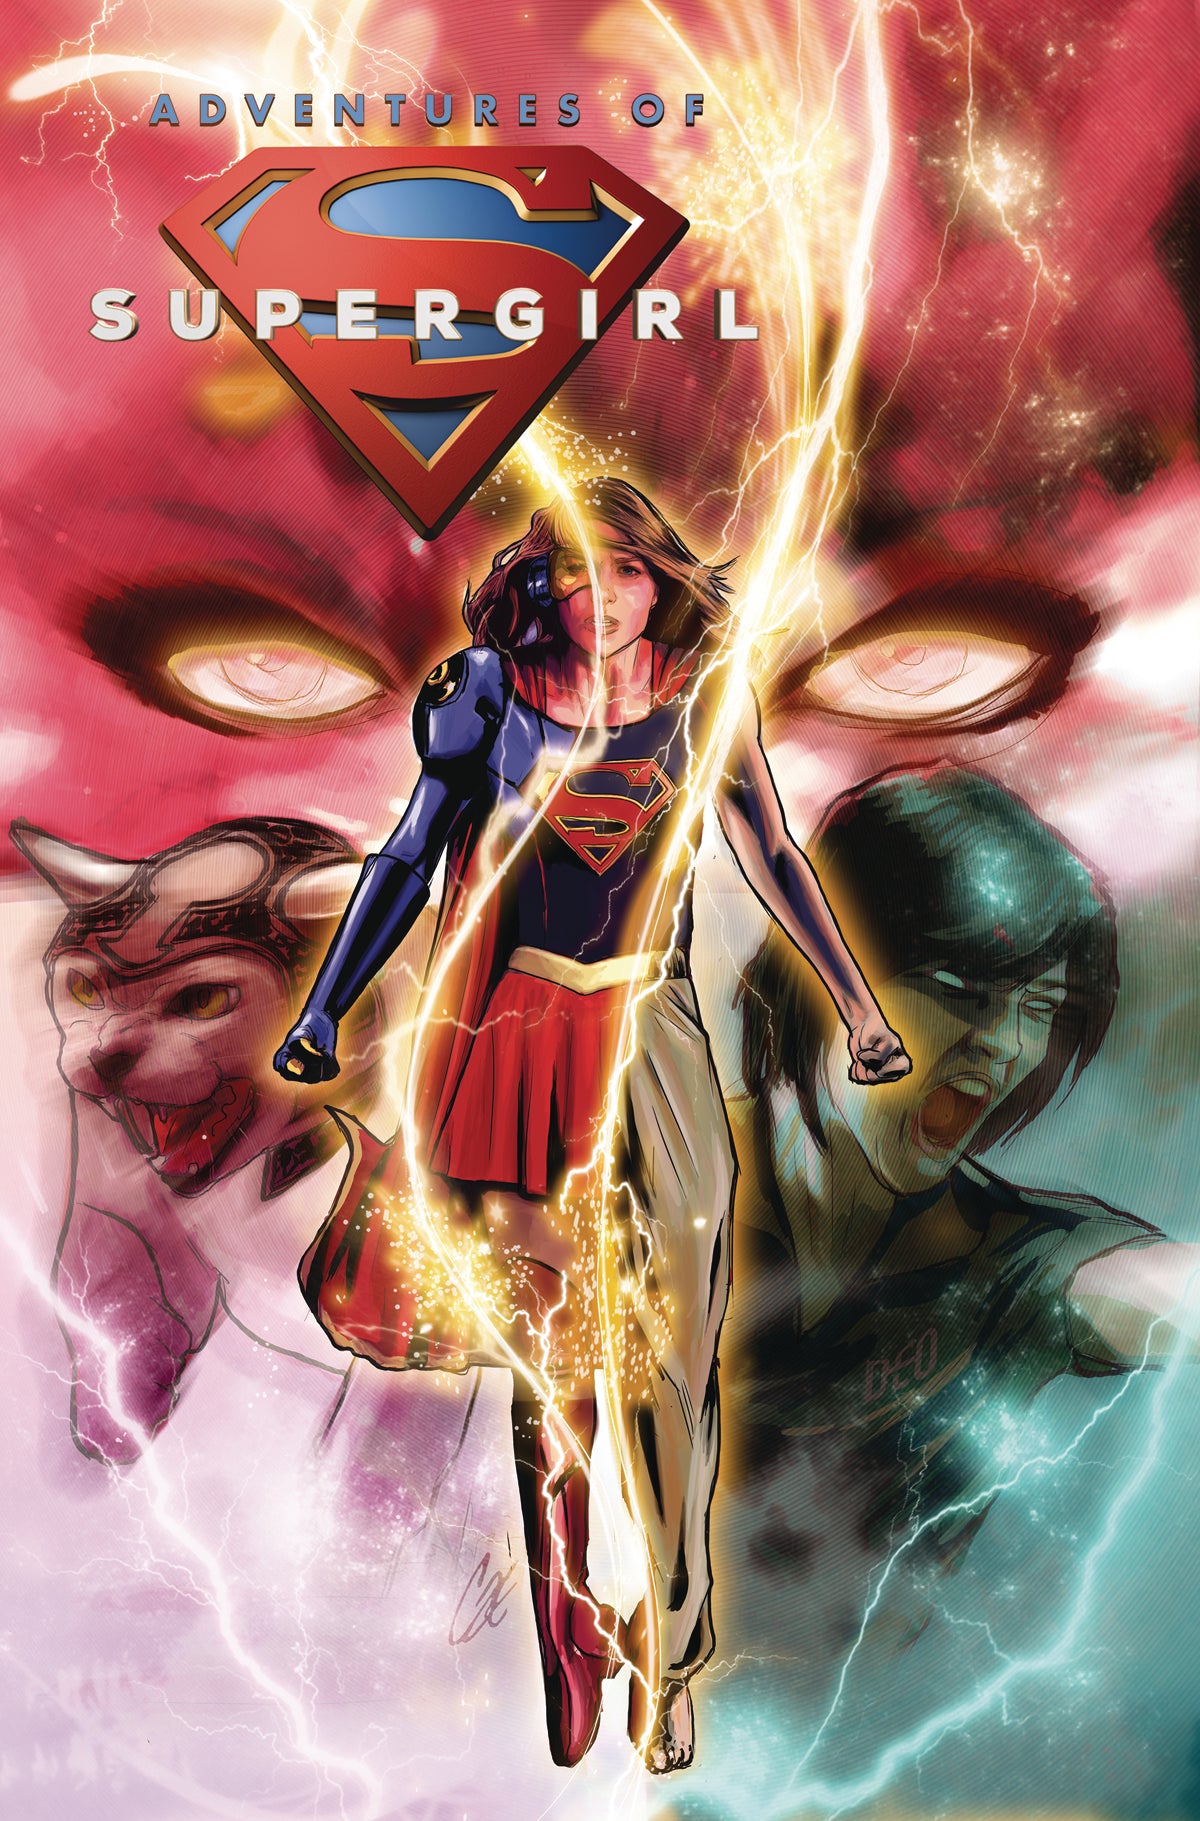 Photo of Adventures of Supergirl Issue 3 comic sold by Stronghold Collectibles